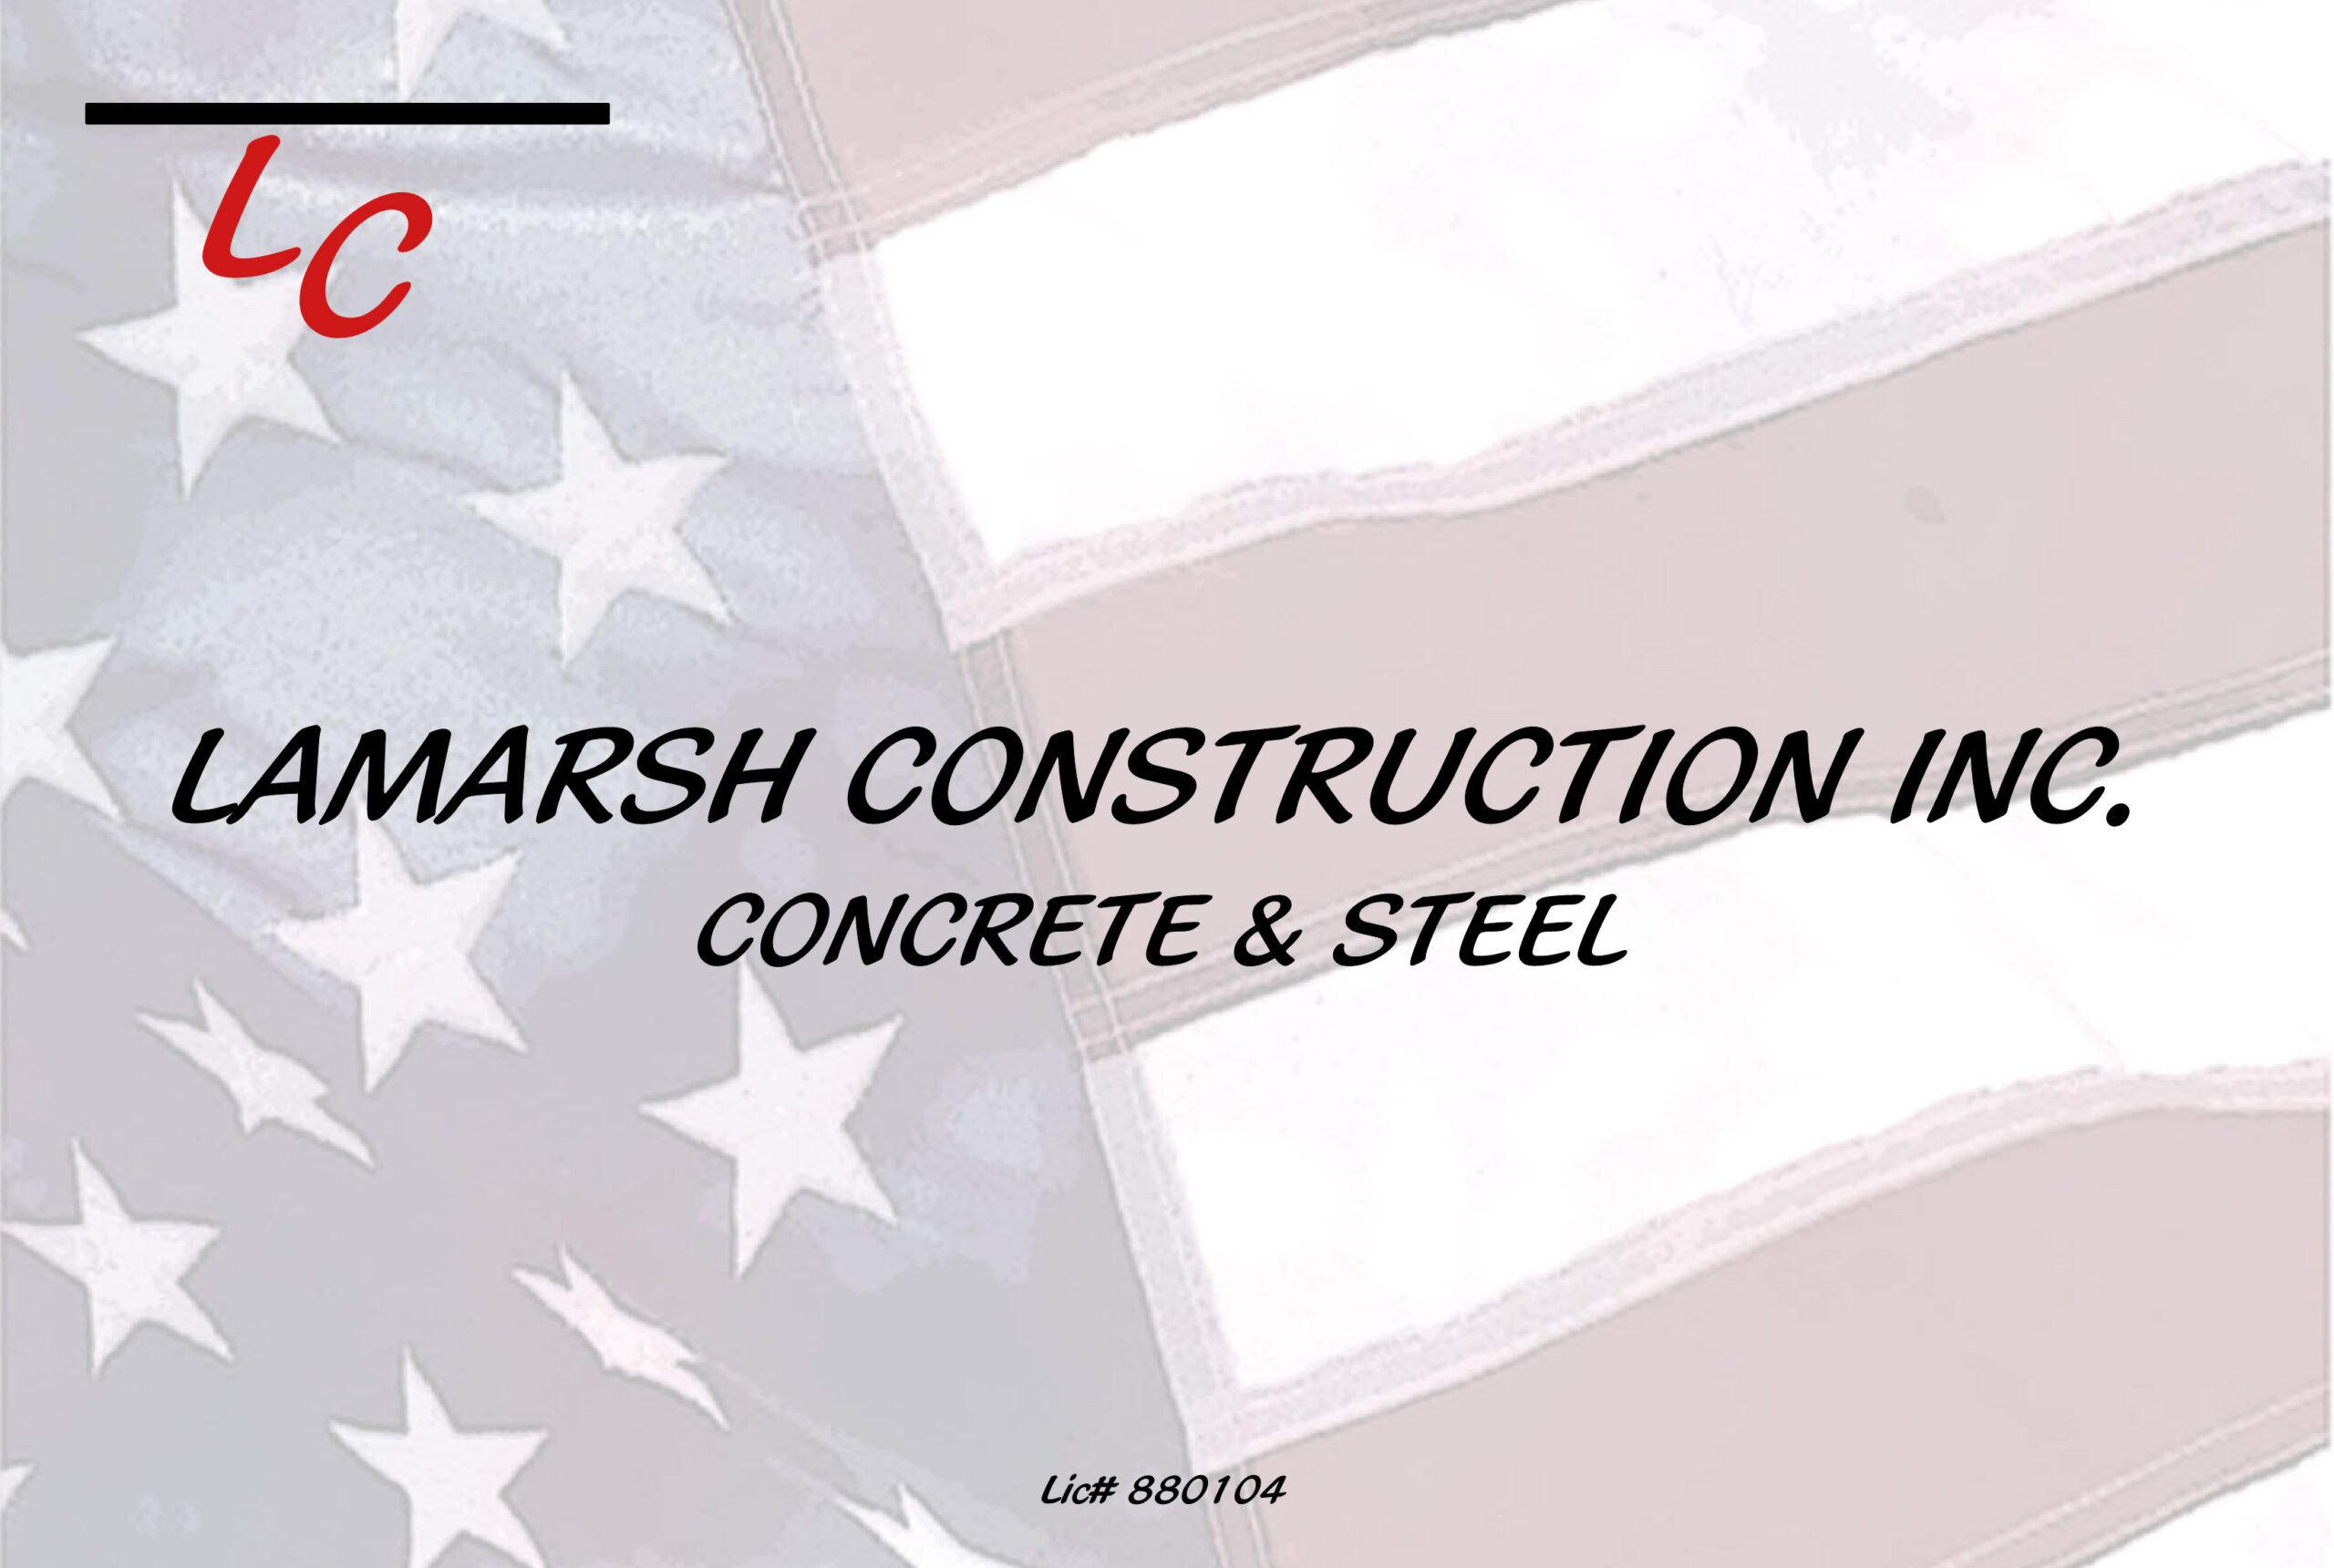 Lamarsh Construction Inc. CRCHA Banner Cropped to 4 x 6 Aspect Ratio